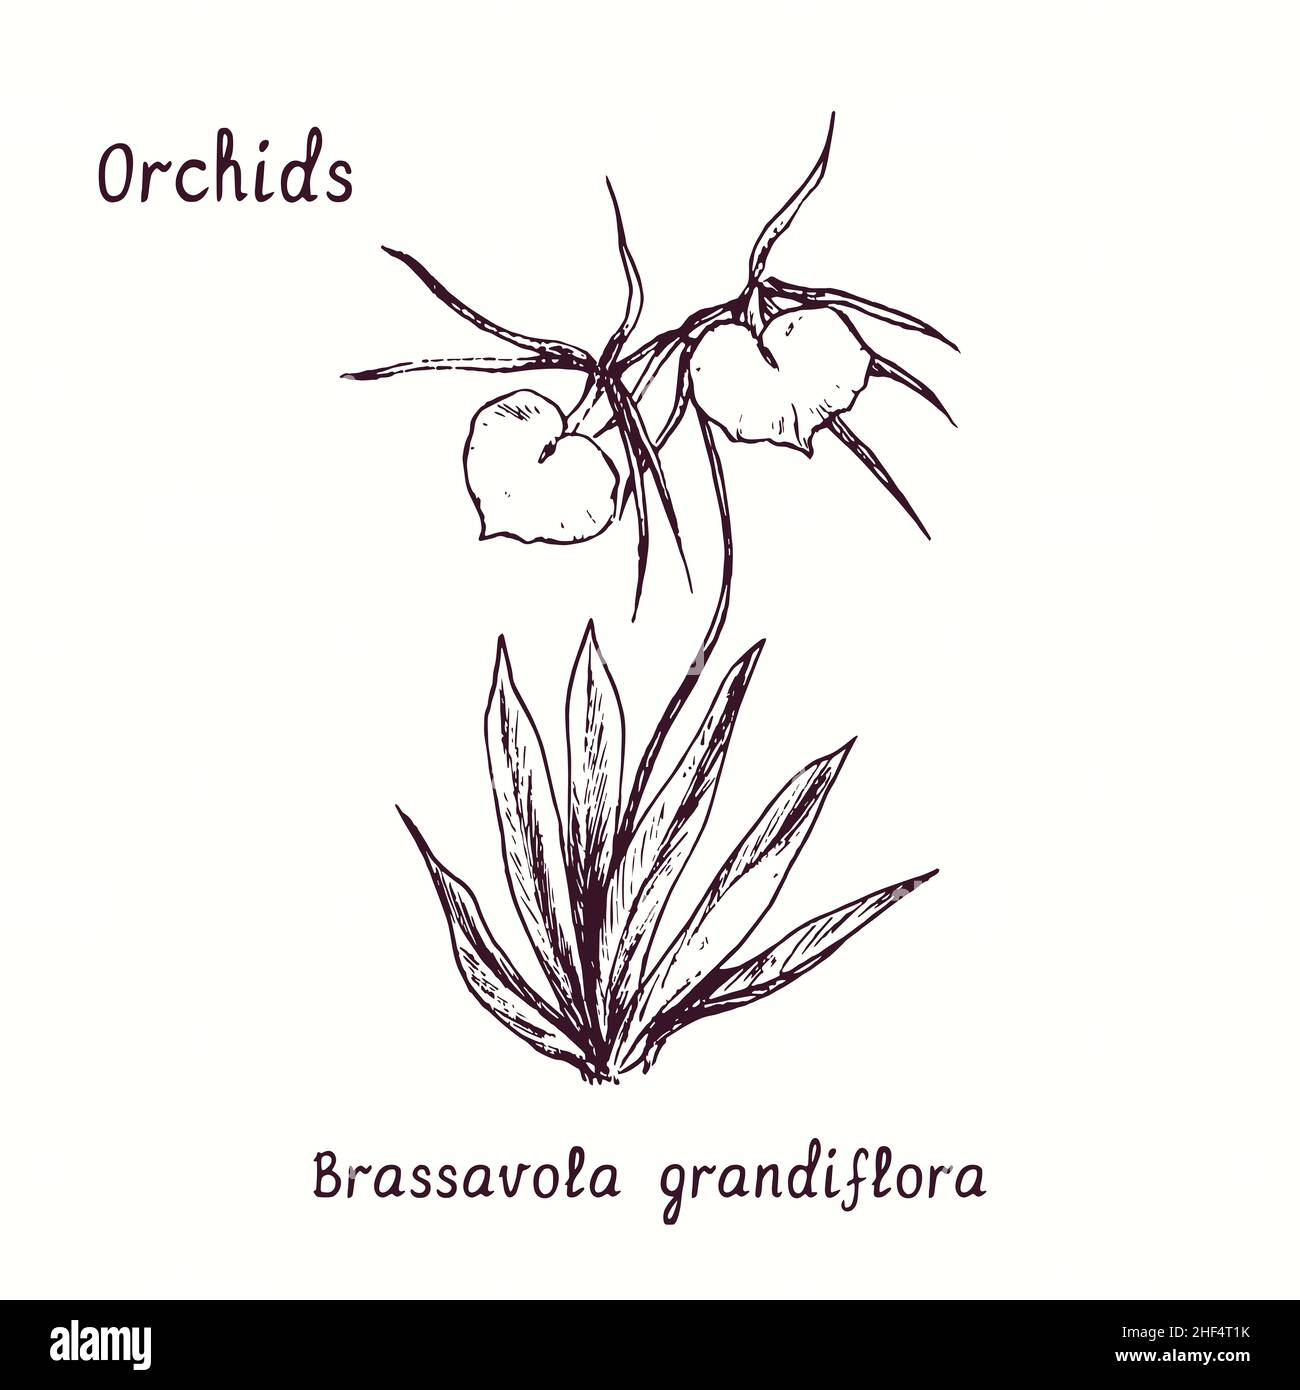 Brassavola grandiflora (Lady of the Night orchid) orchids flower collection. Ink black and white doodle drawing in woodcut style with inscription. Stock Photo